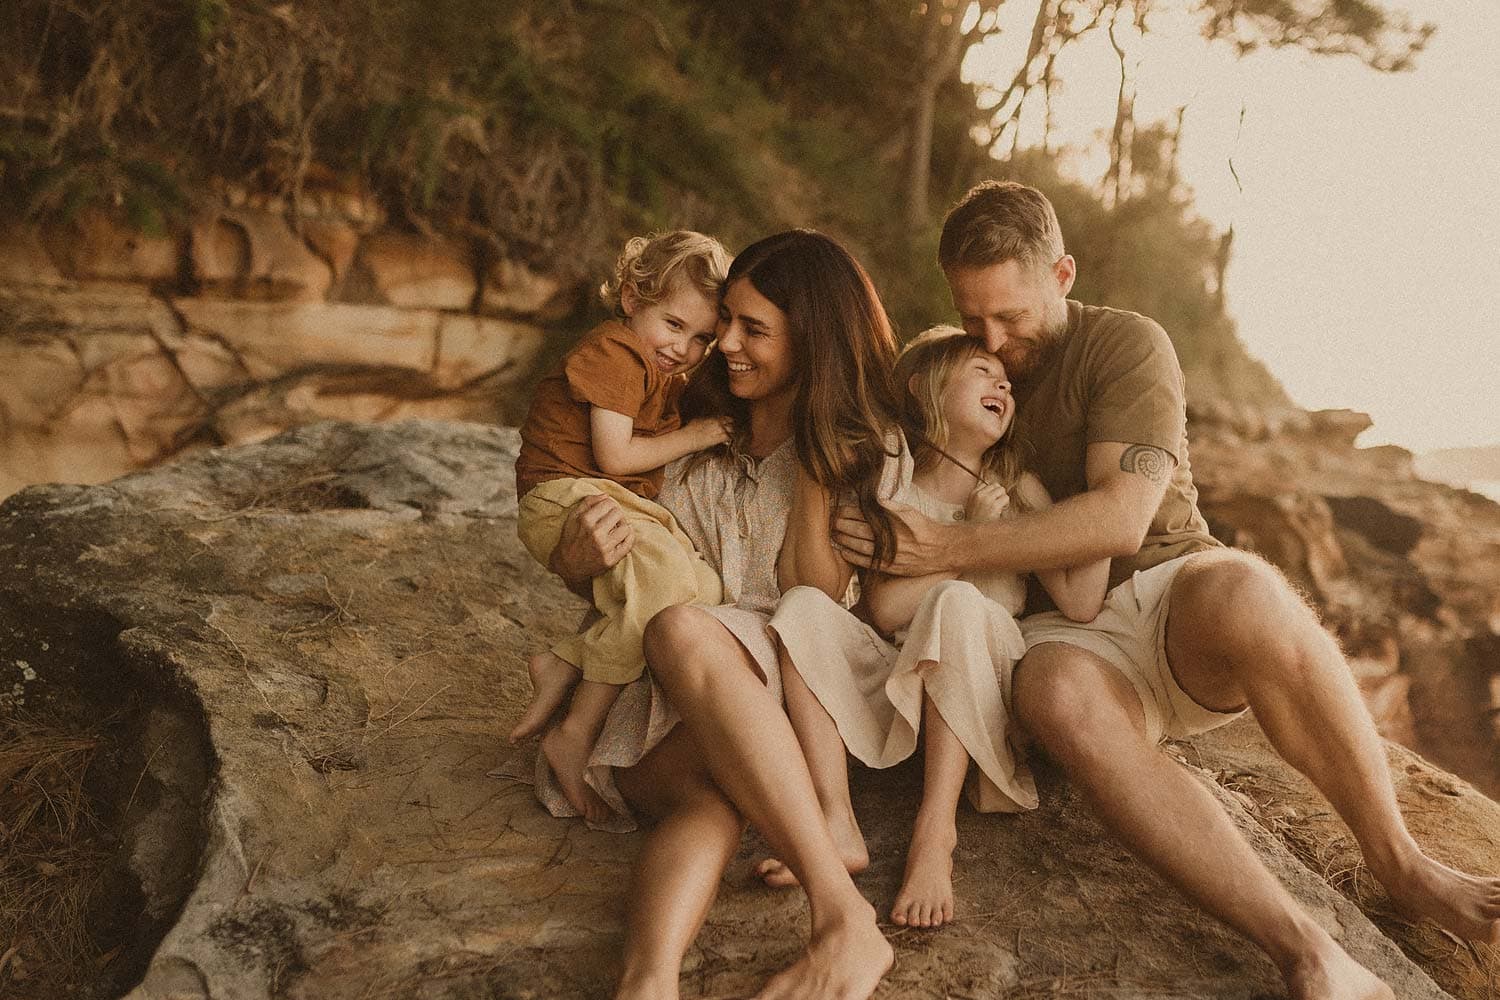 Lifestyle-family-photographer-sydney-mum-dad-young-boy-and-girl-sit-atop-a-rock-and-embrace-lovingly-whilst-laughing-with-dad-looking-at-daughter-as-she-laughs-and-mum-suggles-young-boy-as-he-leans-into-her-sweetly